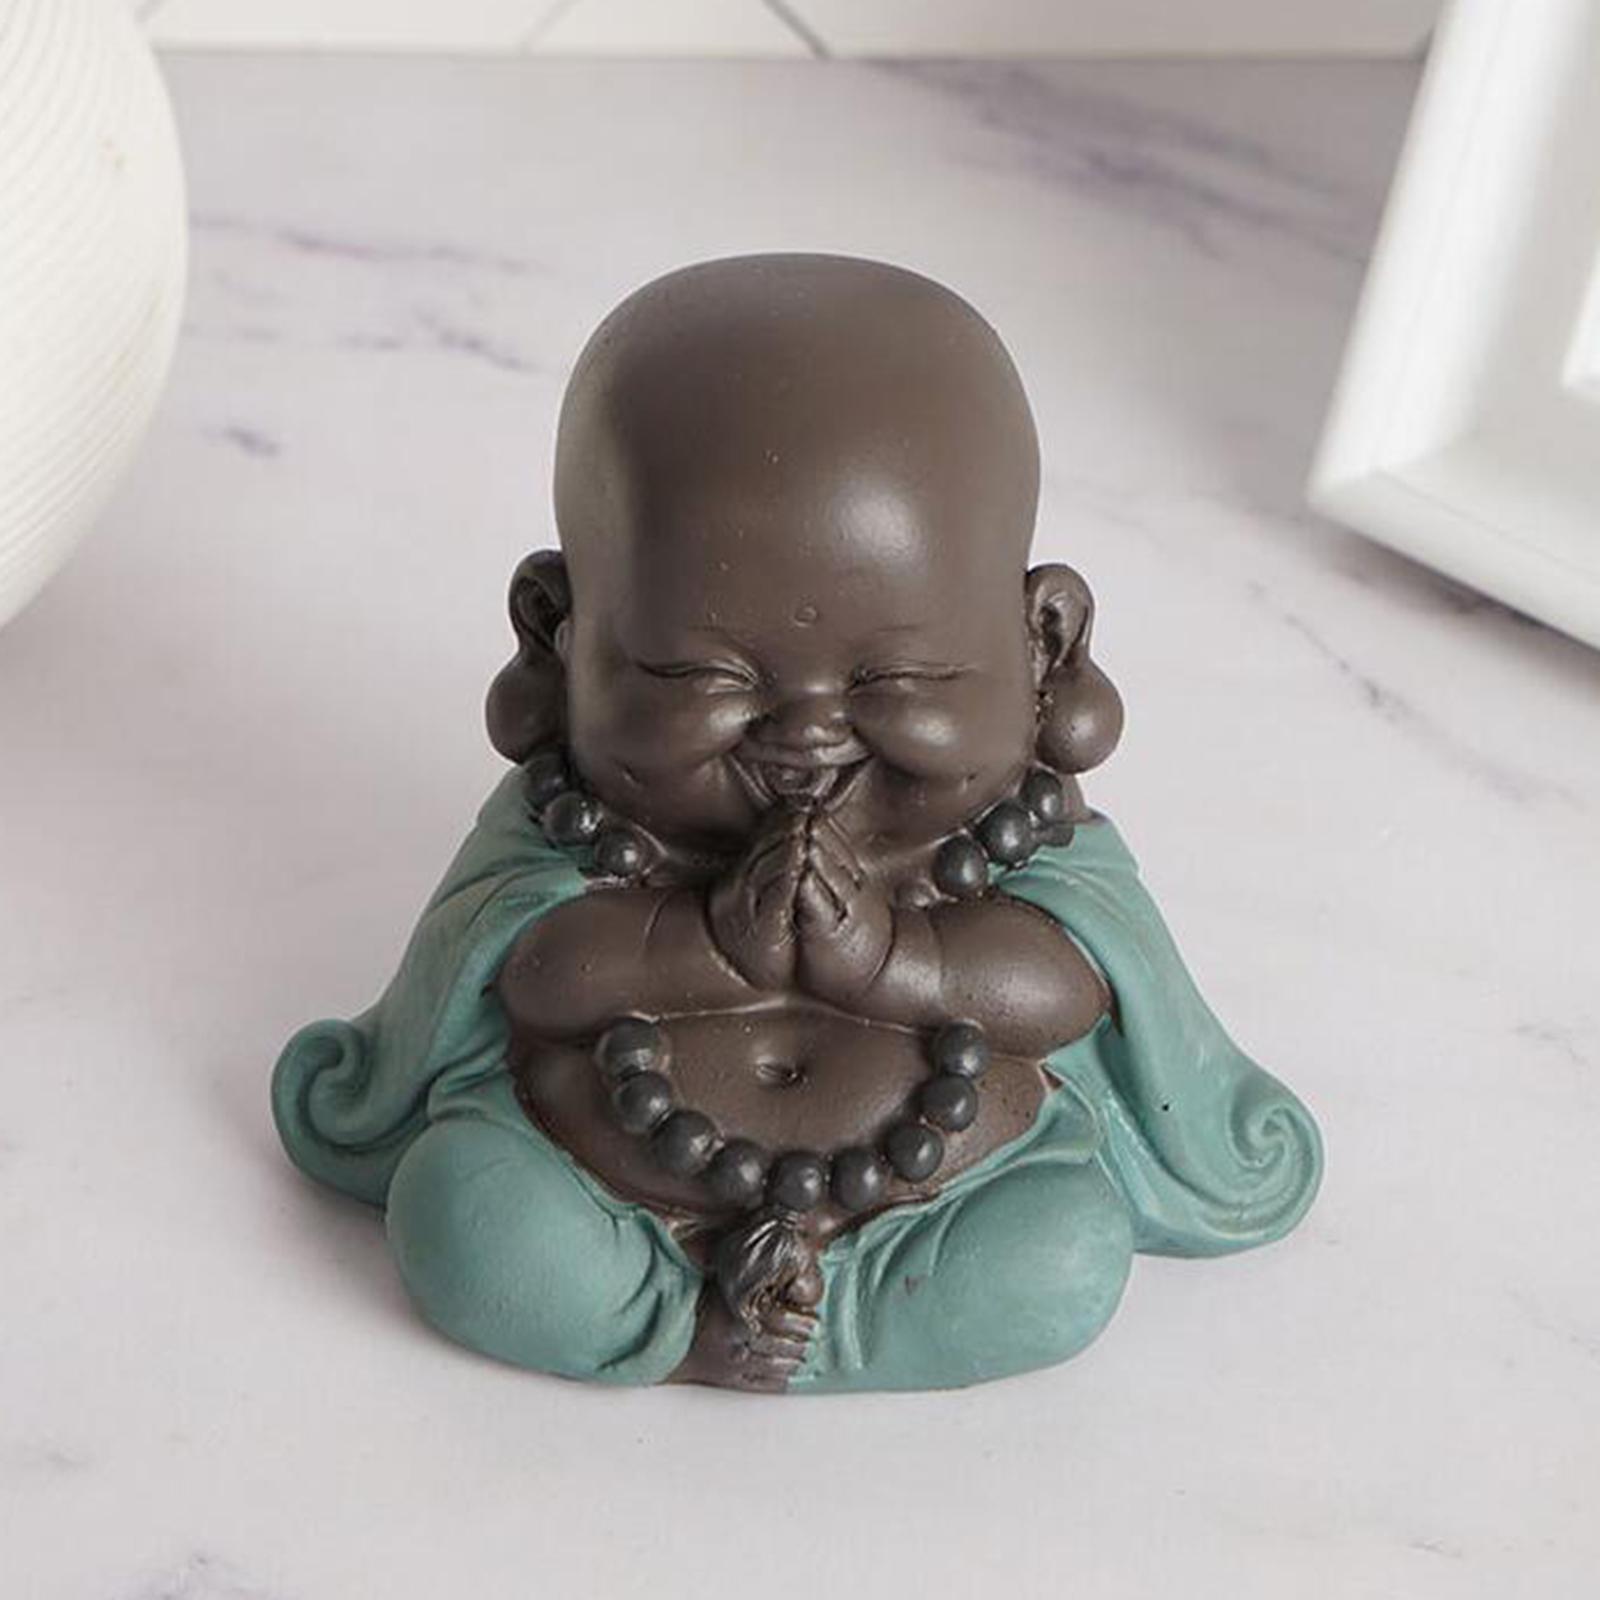 Lovely Smiling Buddha Statue Ornaments tea Handcrafts Little  Figurine for Desktop Office Car Decoration Collectible Art